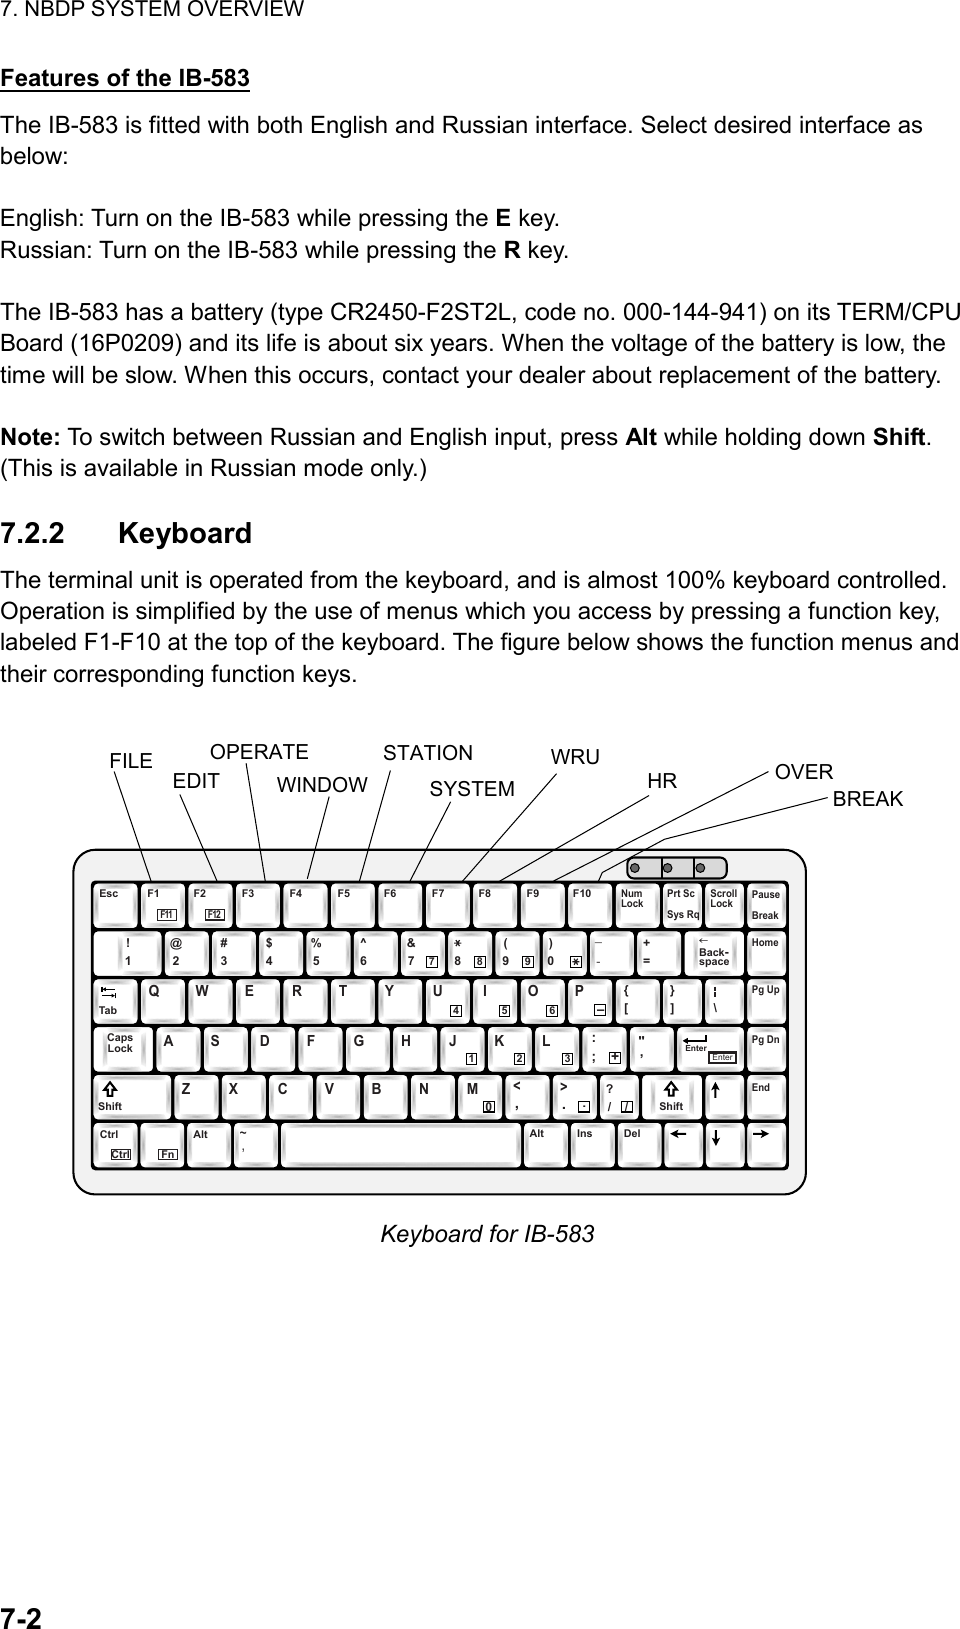 7. NBDP SYSTEM OVERVIEW  7-2  Features of the IB-583 The IB-583 is fitted with both English and Russian interface. Select desired interface as below:  English: Turn on the IB-583 while pressing the E key. Russian: Turn on the IB-583 while pressing the R key.  The IB-583 has a battery (type CR2450-F2ST2L, code no. 000-144-941) on its TERM/CPU Board (16P0209) and its life is about six years. When the voltage of the battery is low, the time will be slow. When this occurs, contact your dealer about replacement of the battery.    Note: To switch between Russian and English input, press Alt while holding down Shift. (This is available in Russian mode only.)  7.2.2 Keyboard The terminal unit is operated from the keyboard, and is almost 100% keyboard controlled. Operation is simplified by the use of menus which you access by pressing a function key, labeled F1-F10 at the top of the keyboard. The figure below shows the function menus and their corresponding function keys.  5!1@2#3$4%5^6+=&amp;77(99Back-spaceHome88)0Pg UpQ W E R T Y I{[}]\TabU4O6P-Pg DnA S D F G H&quot;’EnterEnterCapsLockJ1K2L3:;+EndShiftZ X C V B N&lt;,?//&gt;.M0ShiftCtrlCtrl FnAlt Alt Ins DelEsc F3 F4 F5 F6 F7 F8 F9 F10NumLockPrt ScSys RqScrollLock PauseBreakF1F11F2F125_-~,I.FILE EDITOPERATEWINDOWSTATIONSYSTEMWRUHR BREAKOVER Keyboard for IB-583 